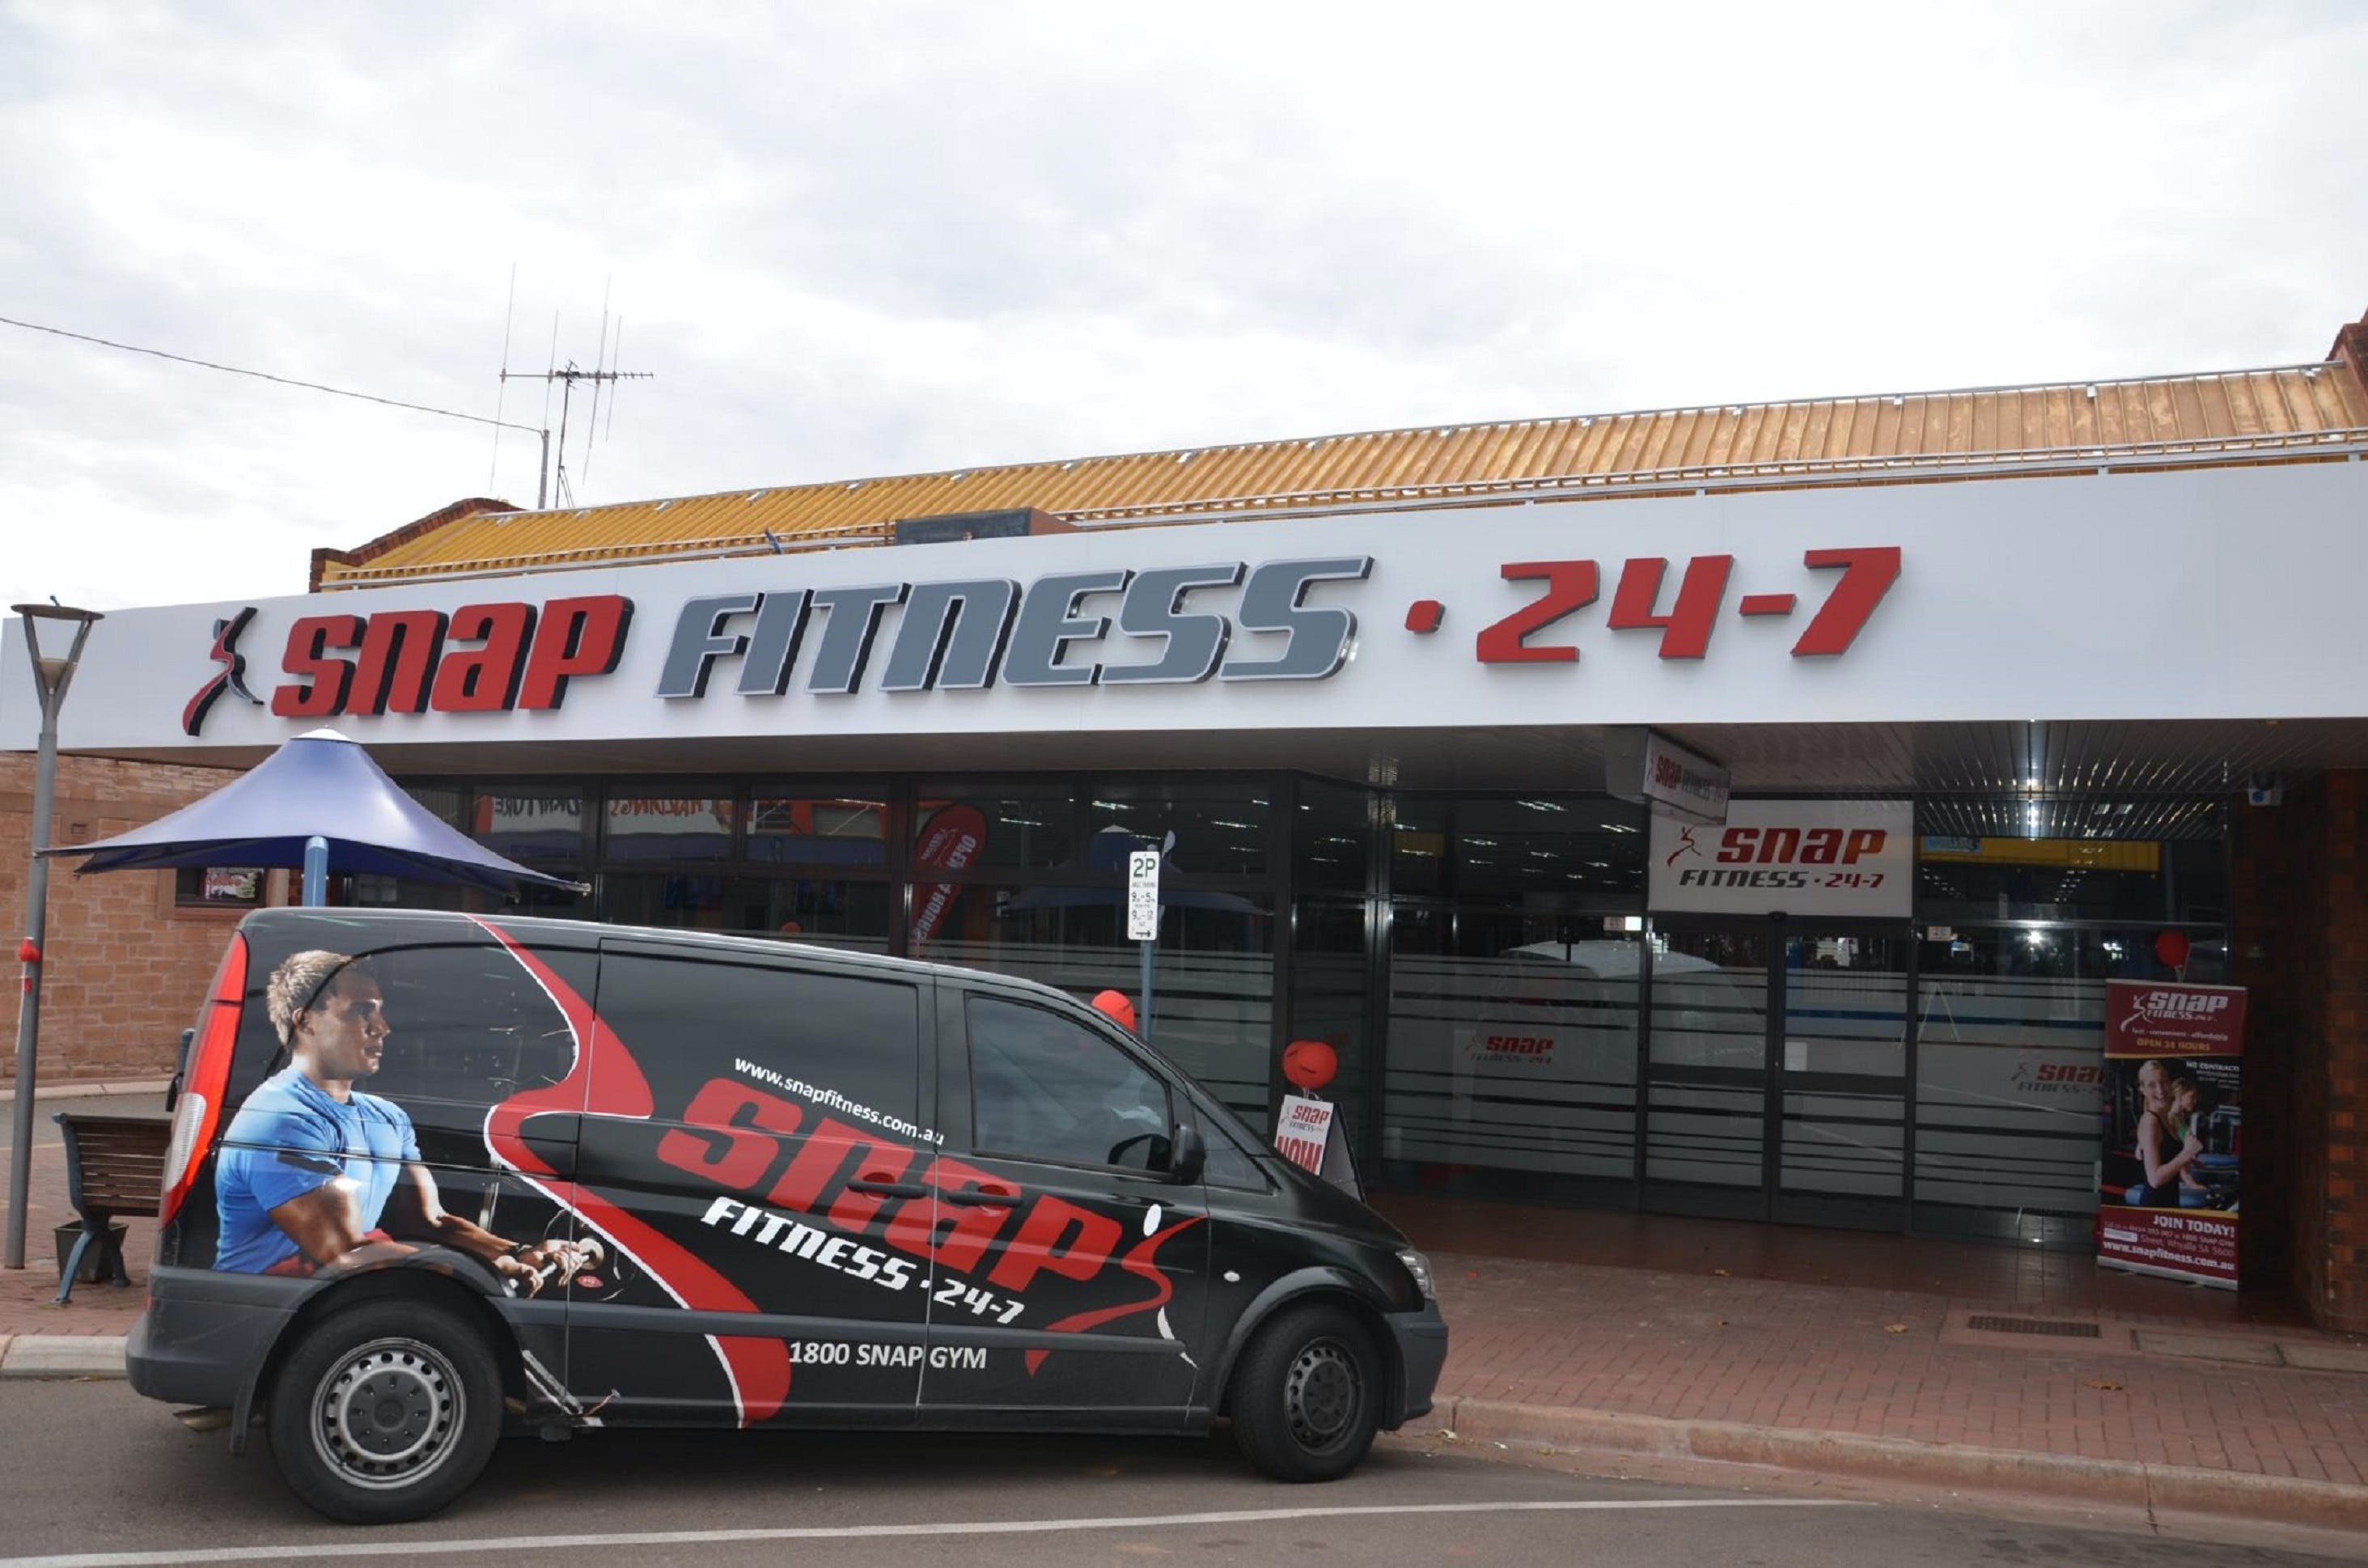 Snap Fitness Whyalla 24/7 gym - Nambucca Heads Accommodation